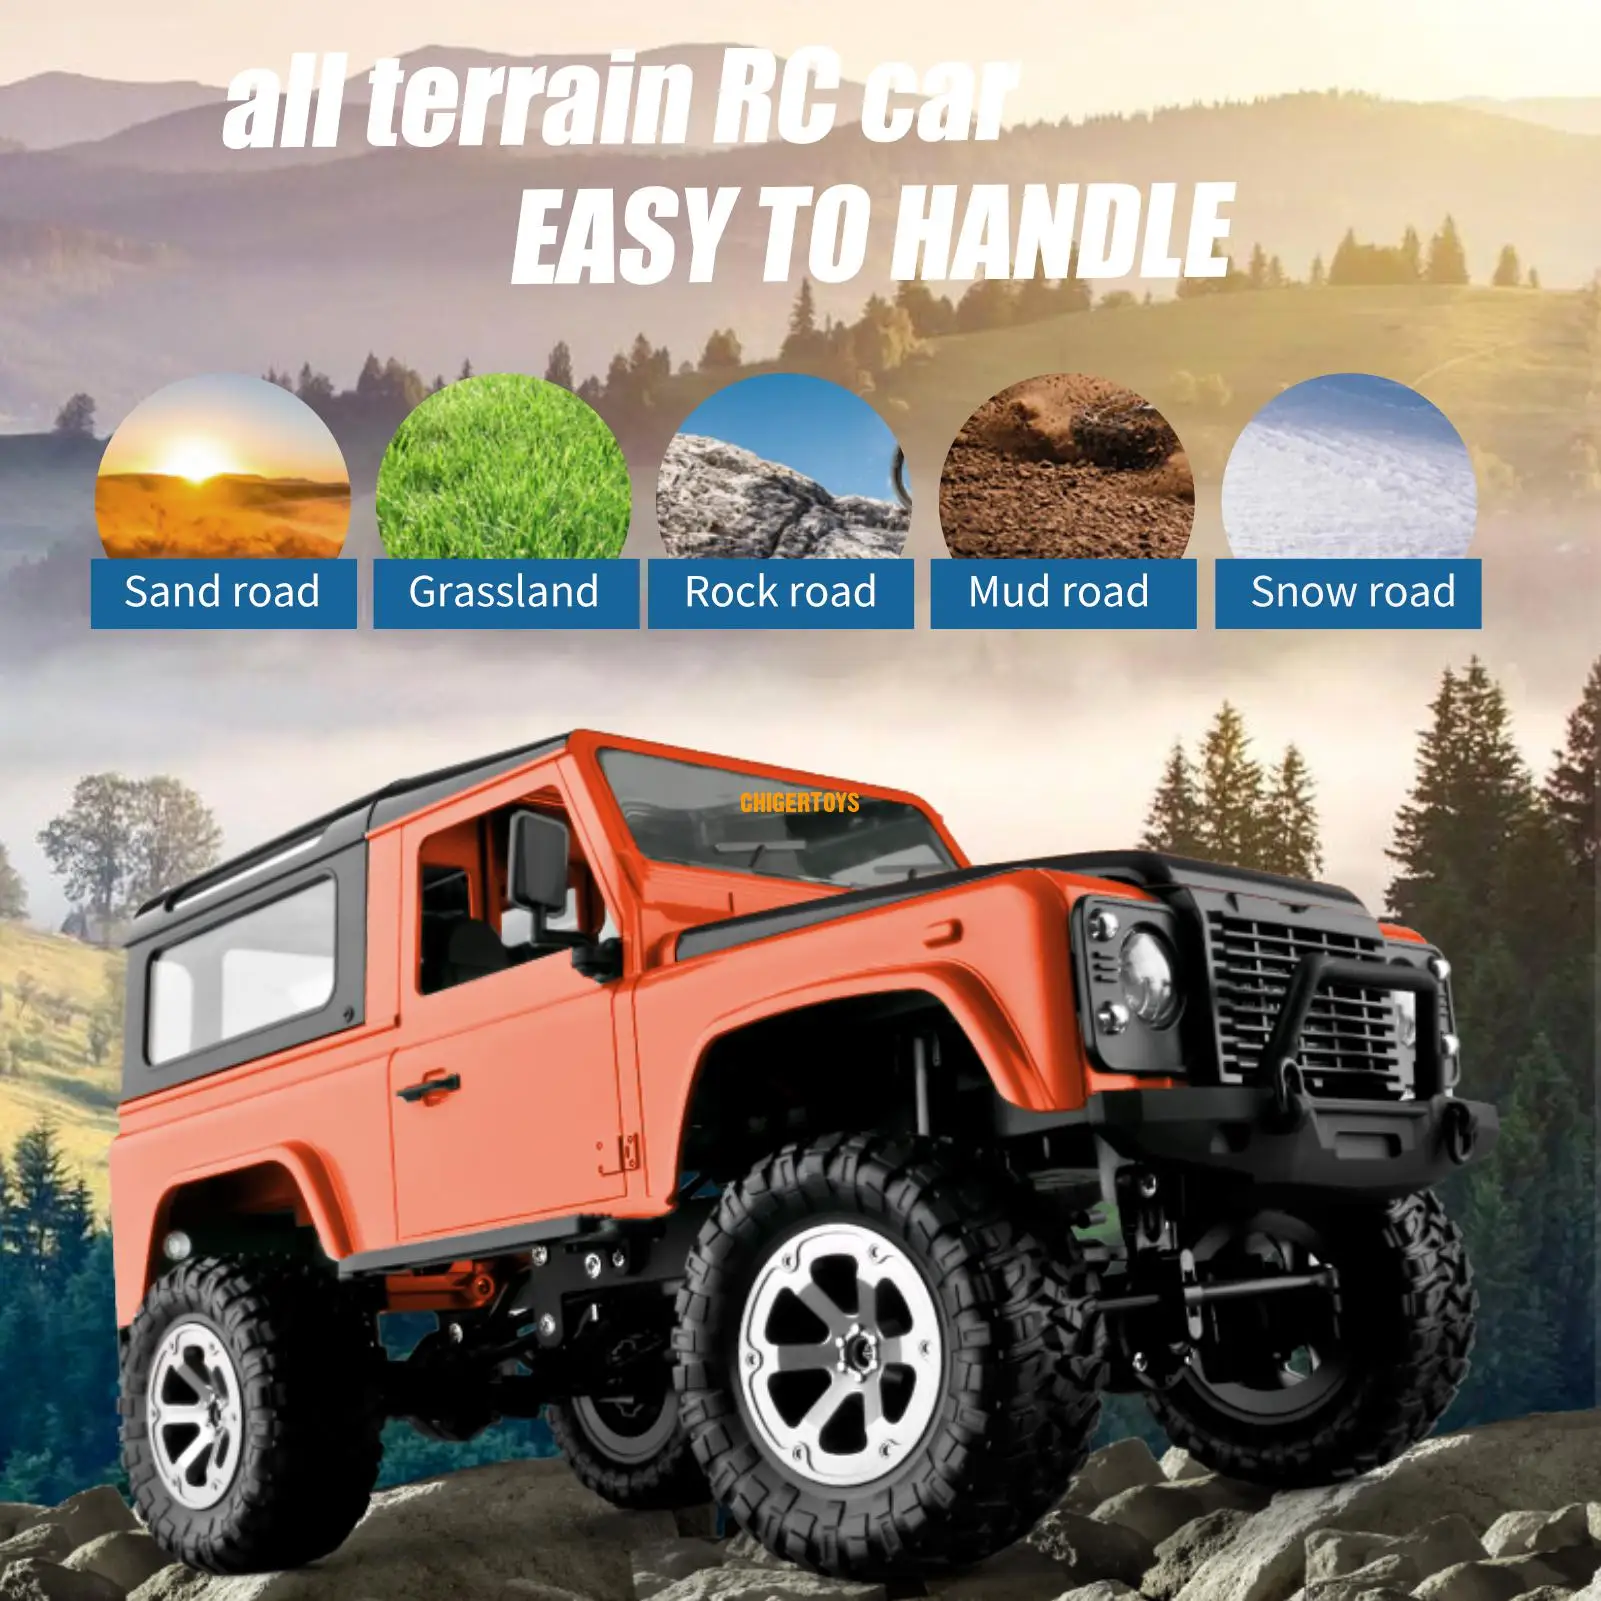 1:12 FY003-1A RC Rock Crawler 4WD Off Road Car 2.4GHz Strong Controllability RC Cars 50min playtime Big RC Truck Toy Kids enlarge